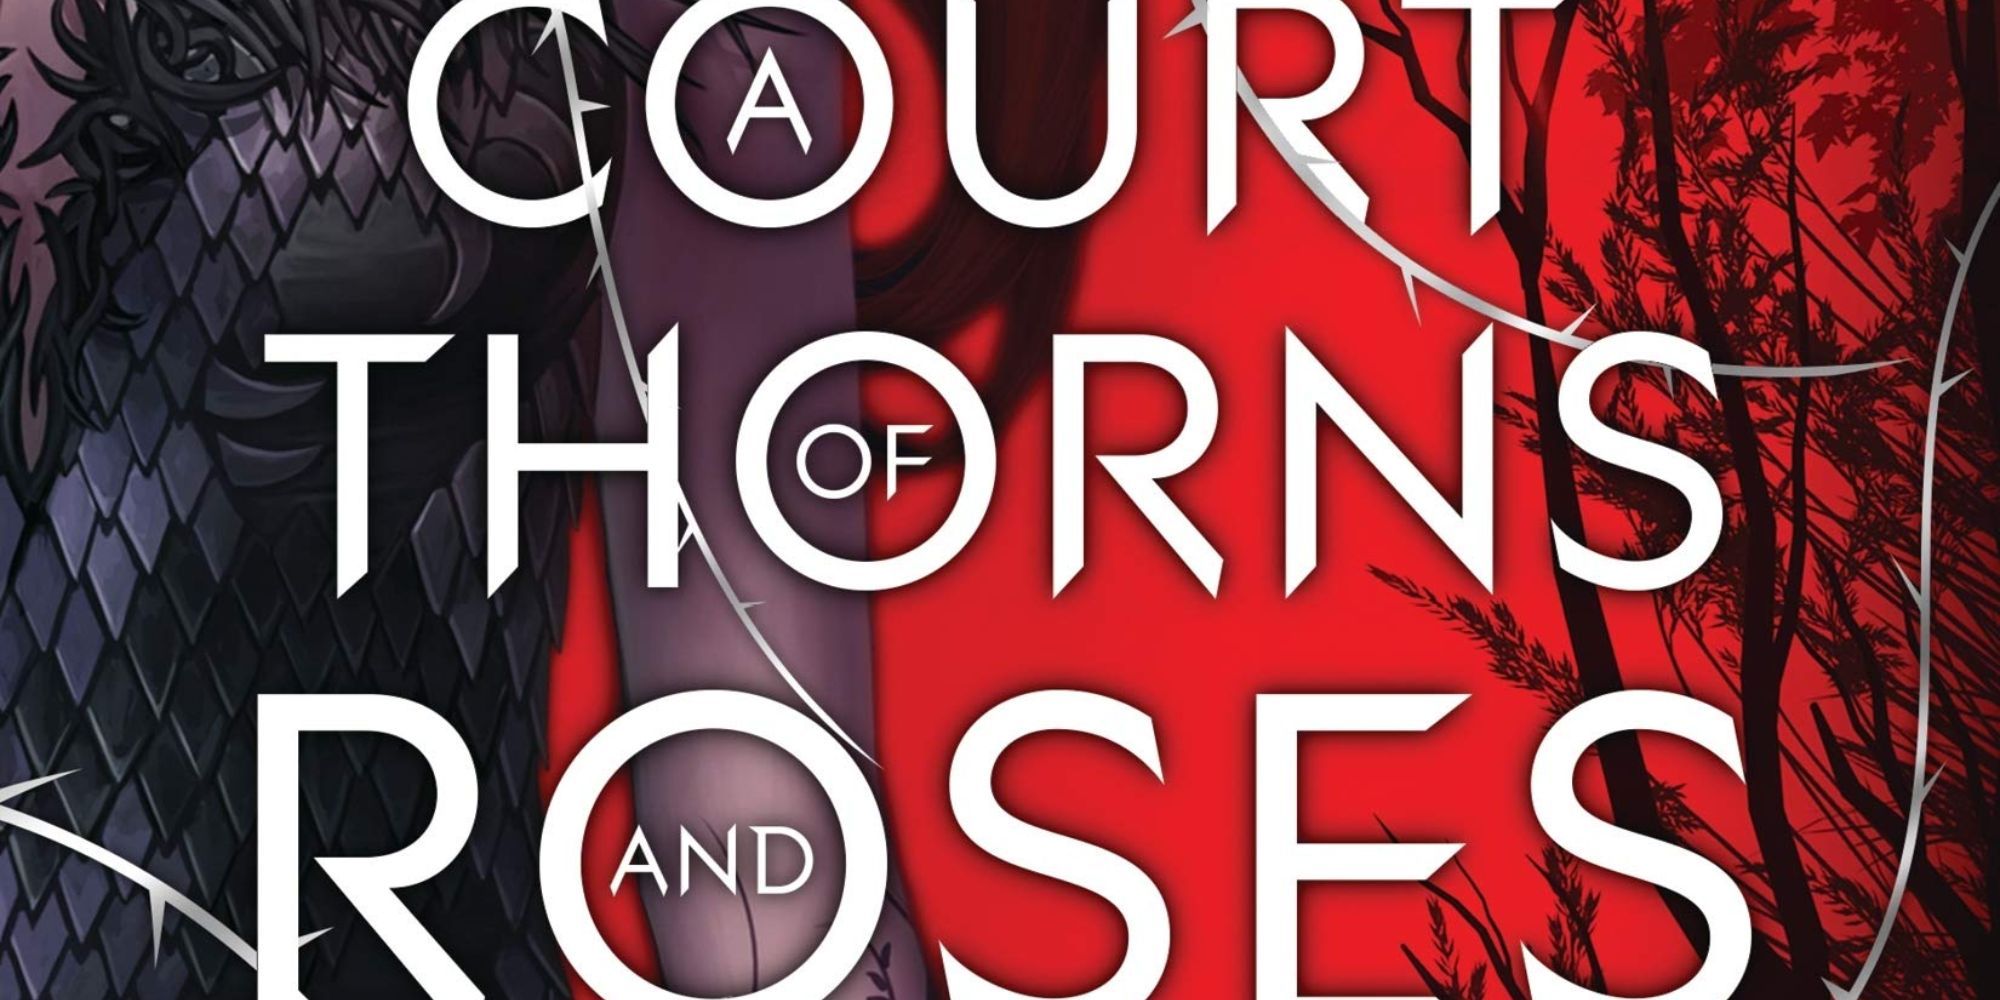 A close-up of the A Court of Thorns and Roses title from the book's cover.